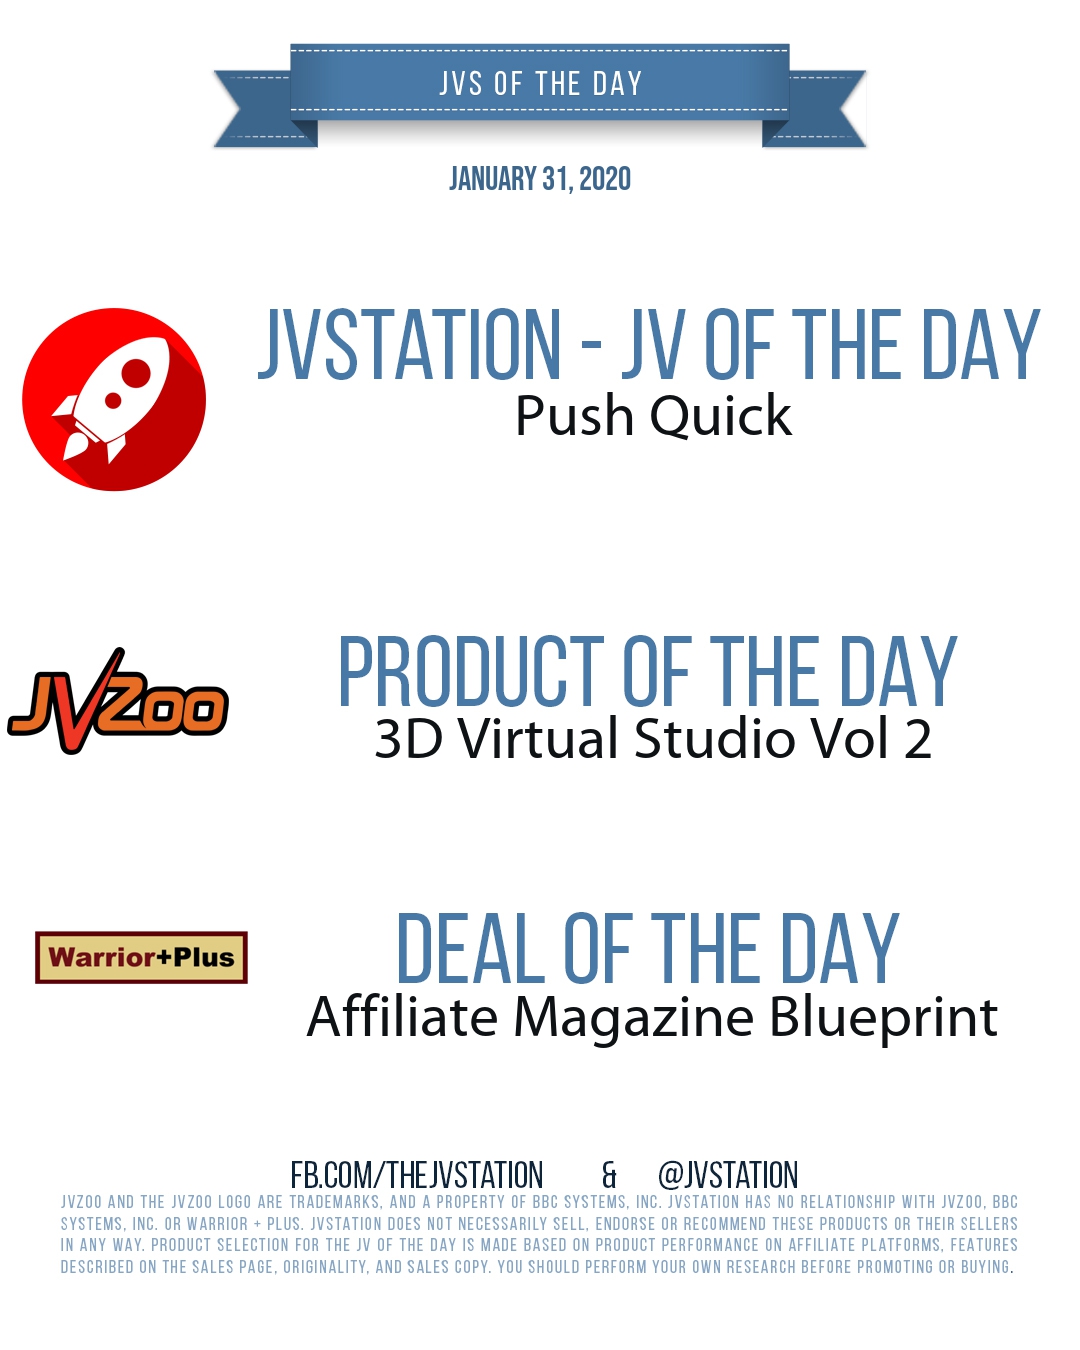 JVs of the day - January 31, 2020